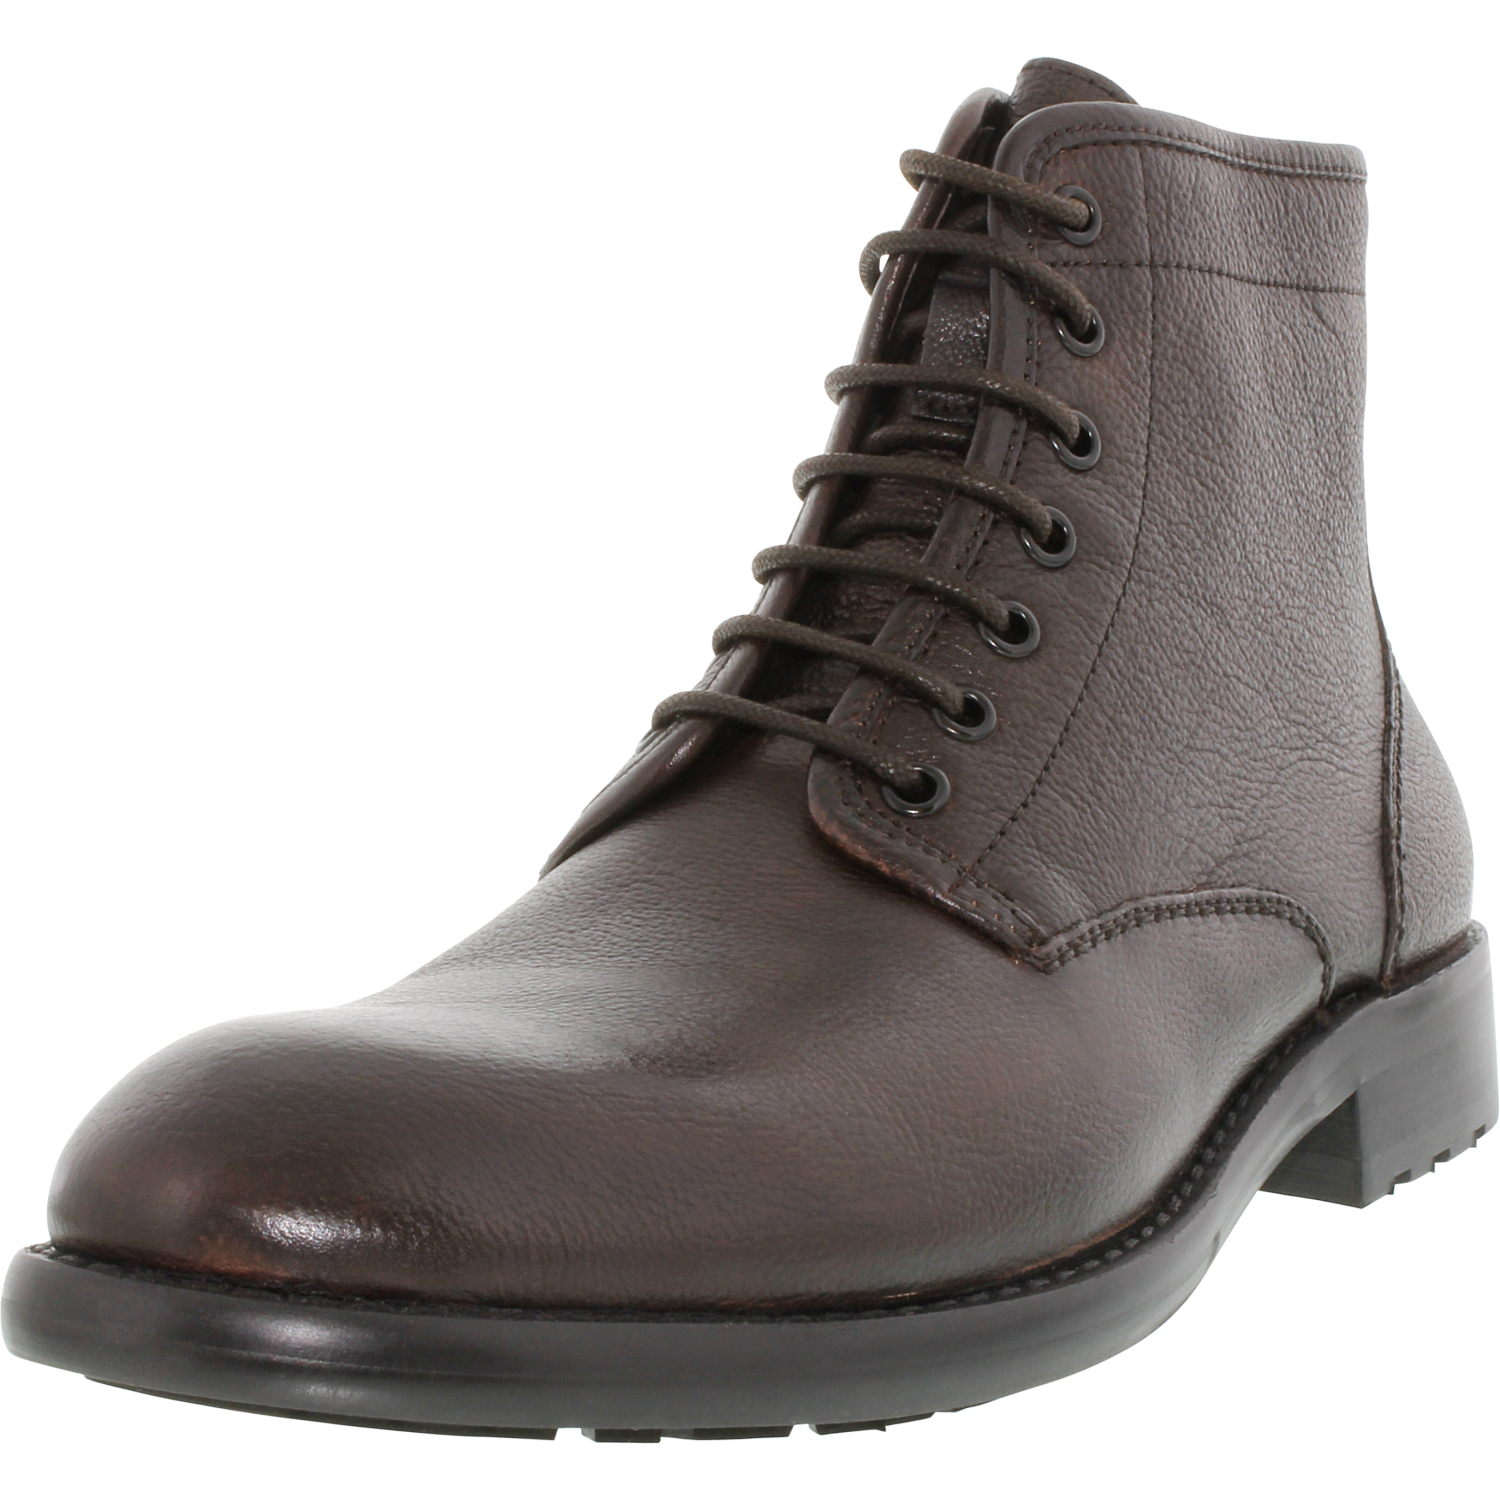 Kenneth Cole Men's Select-Ive Ankle-High Leather Boot